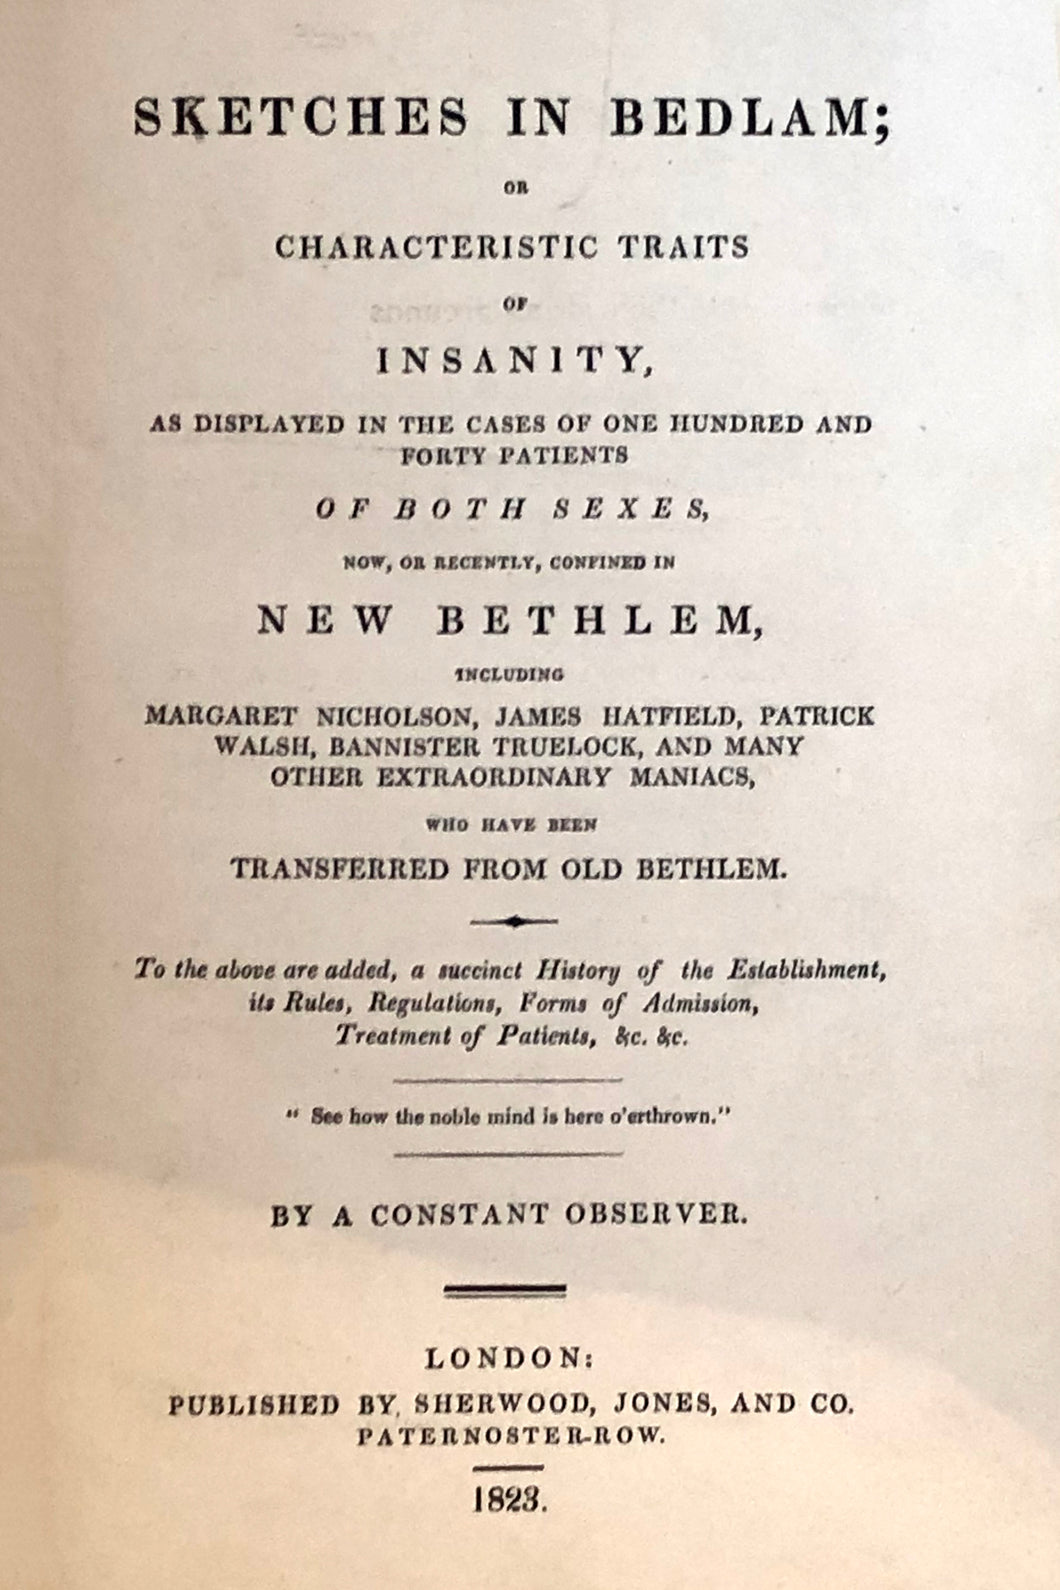 Sketches in Bedlam; or, Characteristic traits of insanity, as displayed in the cases of one hundred and forty patients of both sexes, now, or recently, confined in New Bethlem